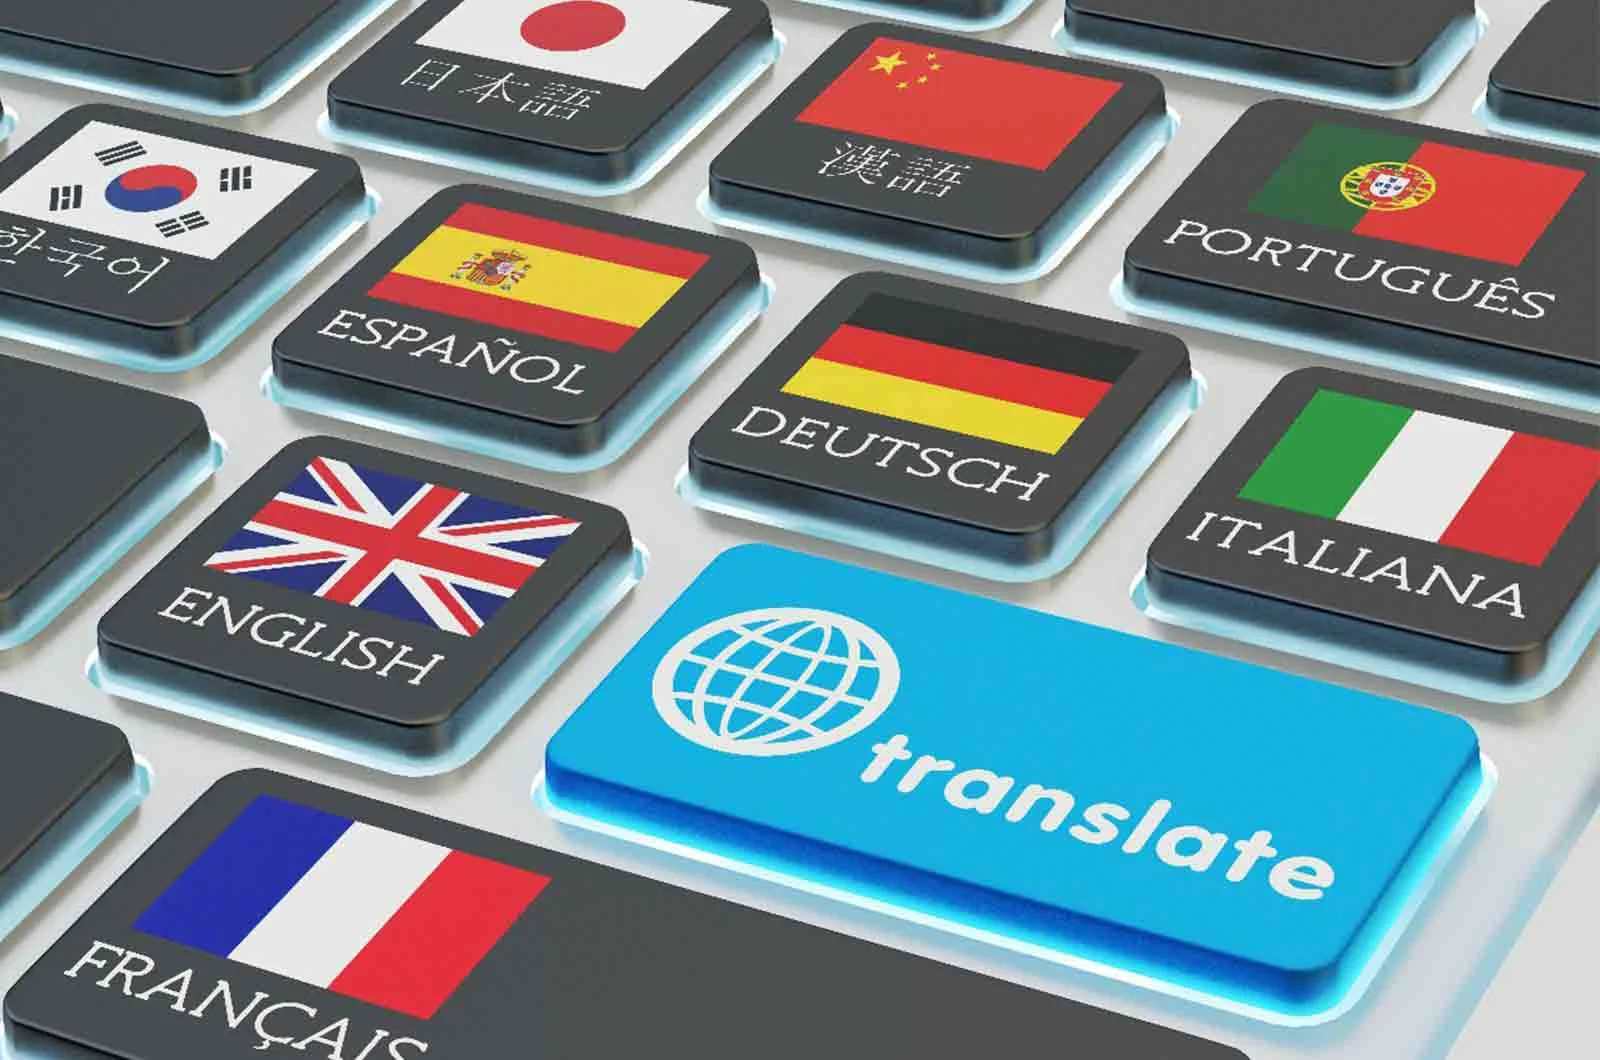 Keyboard with flags and languages of countries and a button saying “Translate”. Concept of professional translation services.